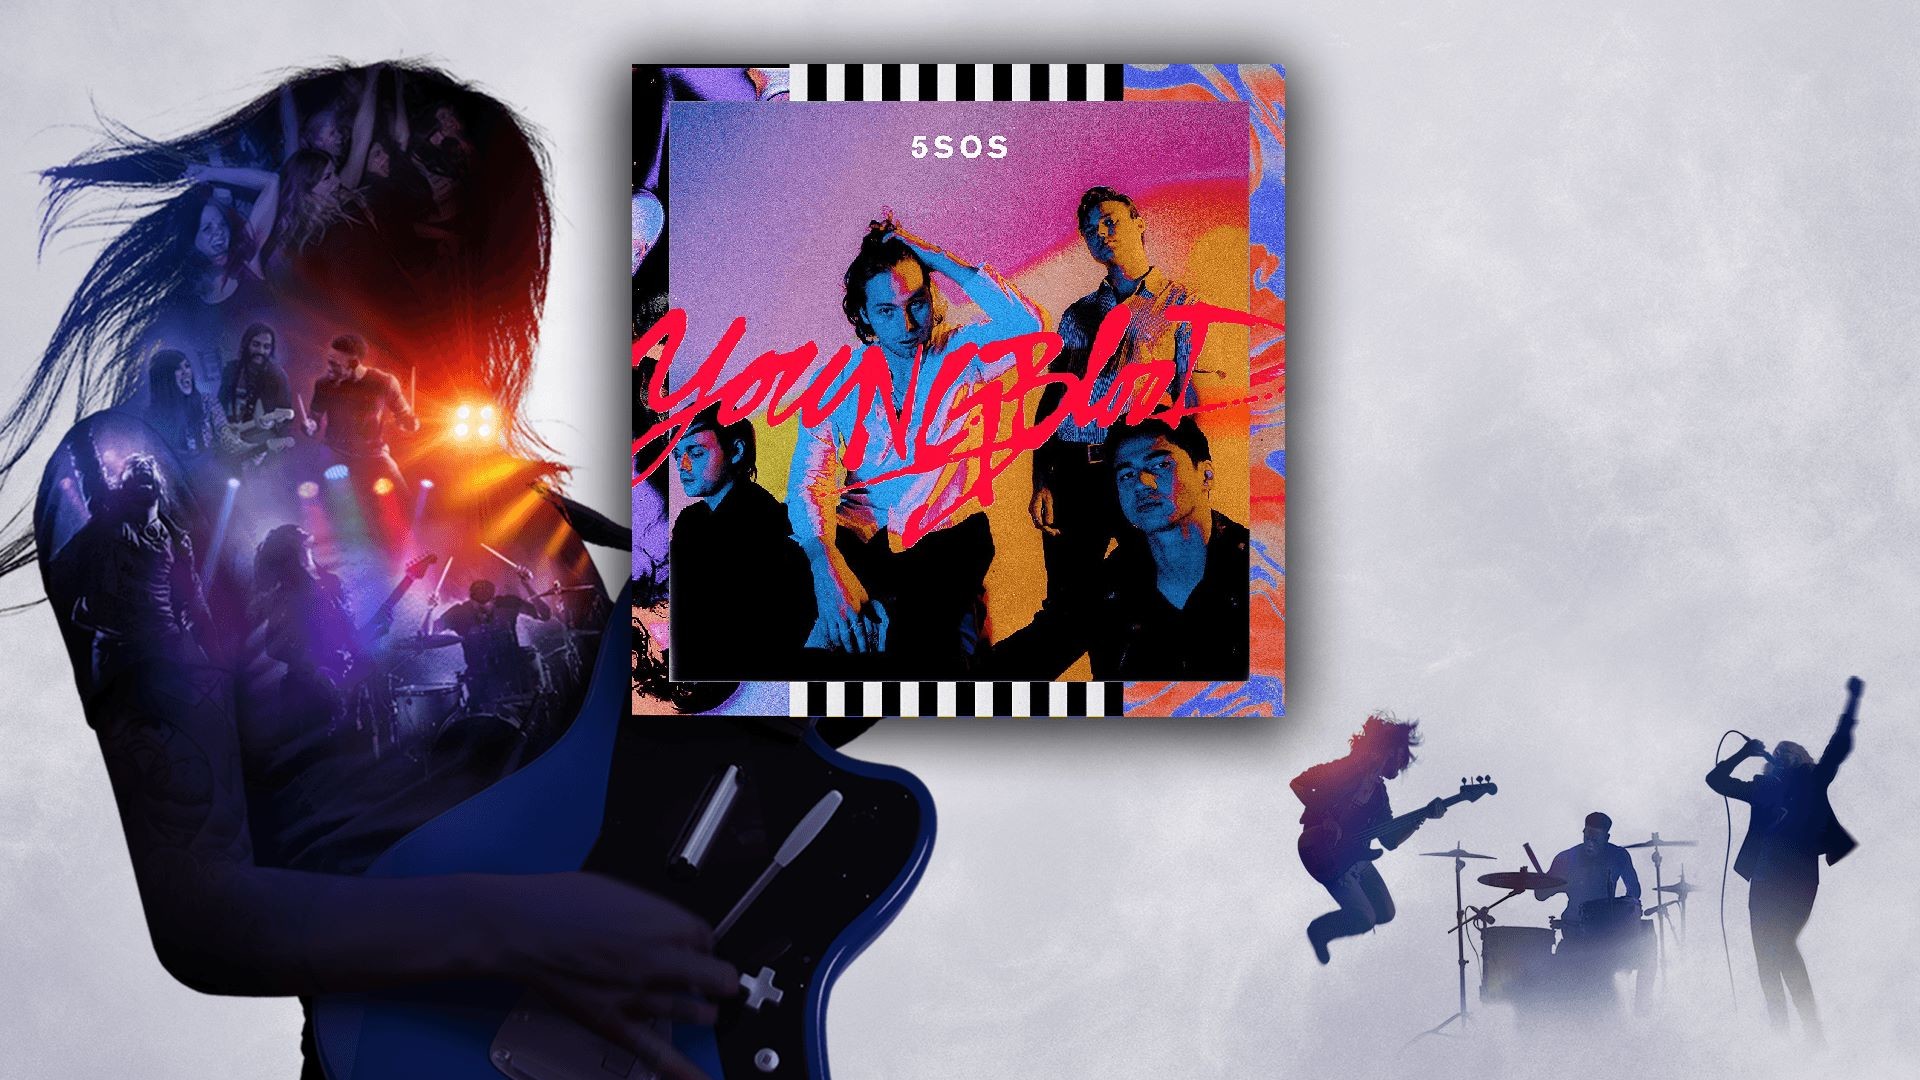 1920x1080 "Youngblood" - 5 Seconds of Summer. "